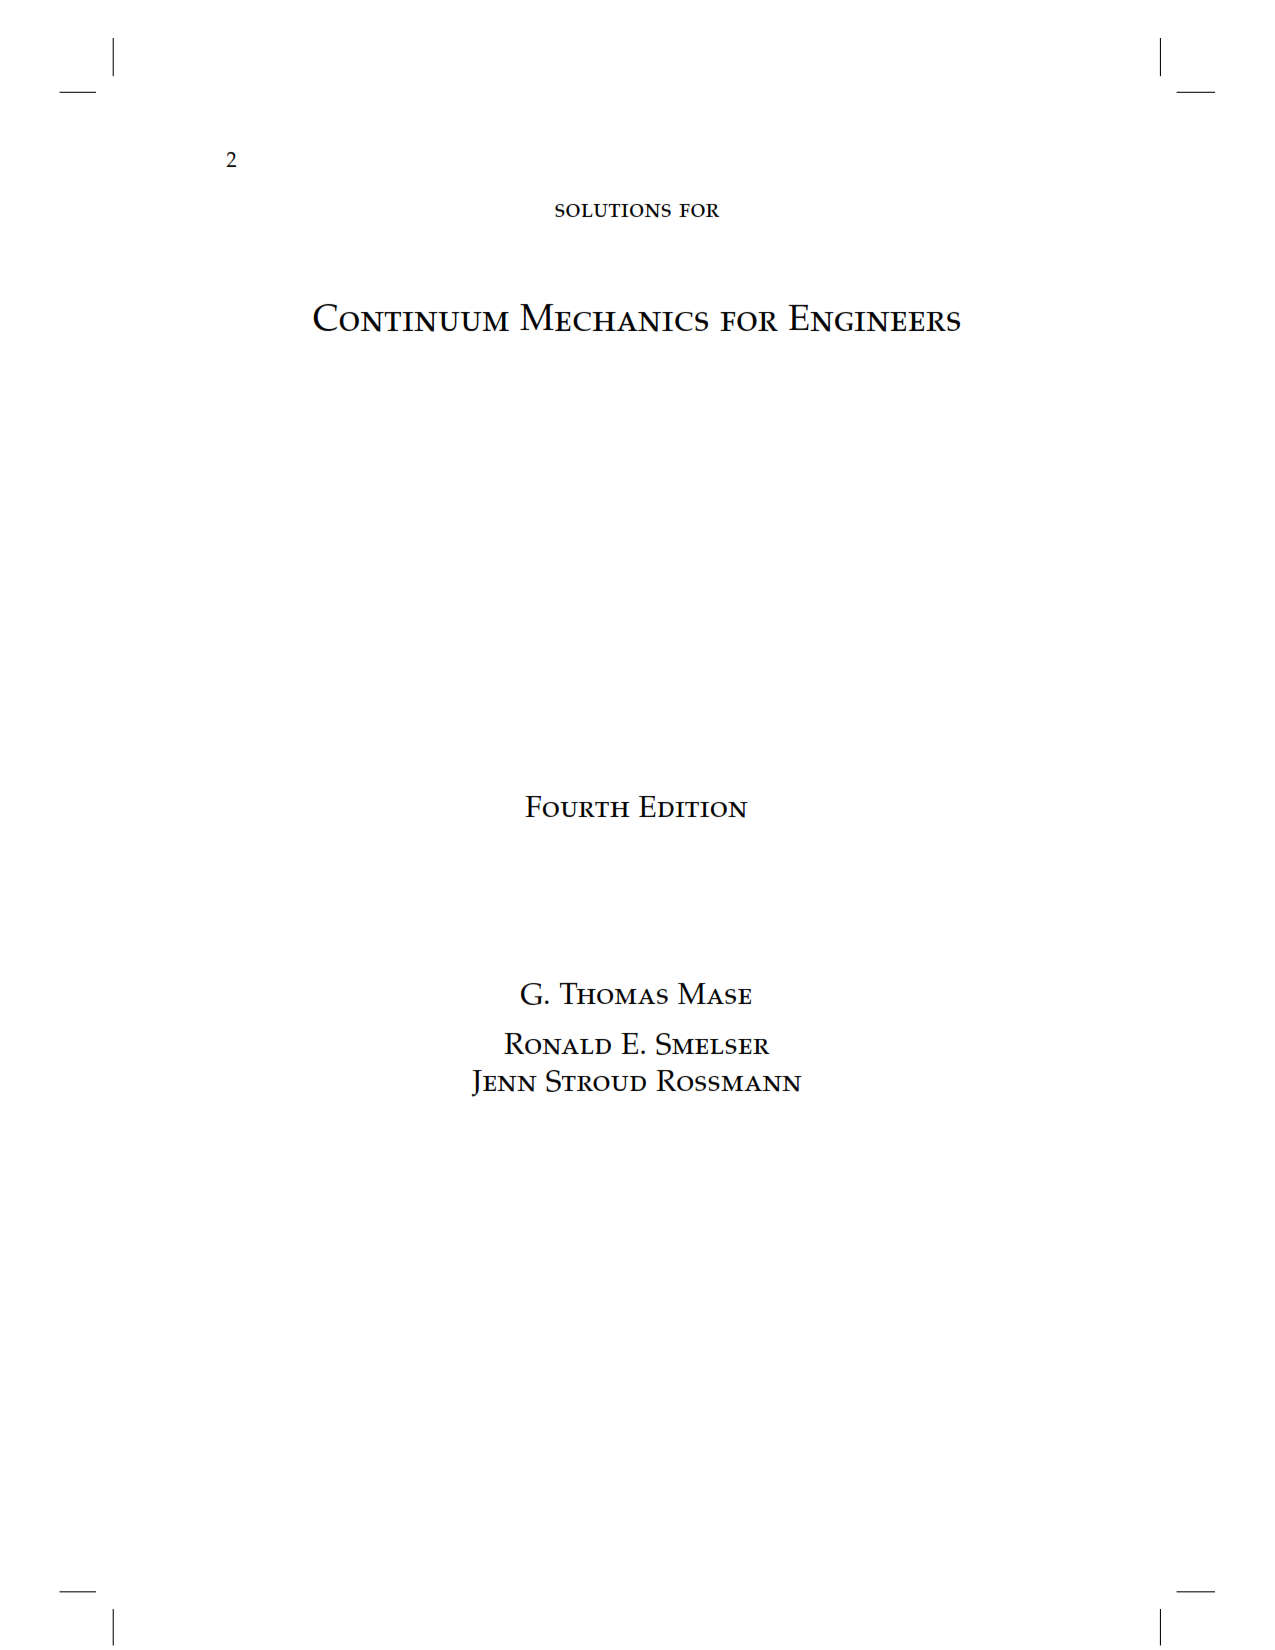 Download free continuum mechanics for engineers third ( 3rd ) & 4th edition Thomas Mase solution manual pdf | Giouemh solutions